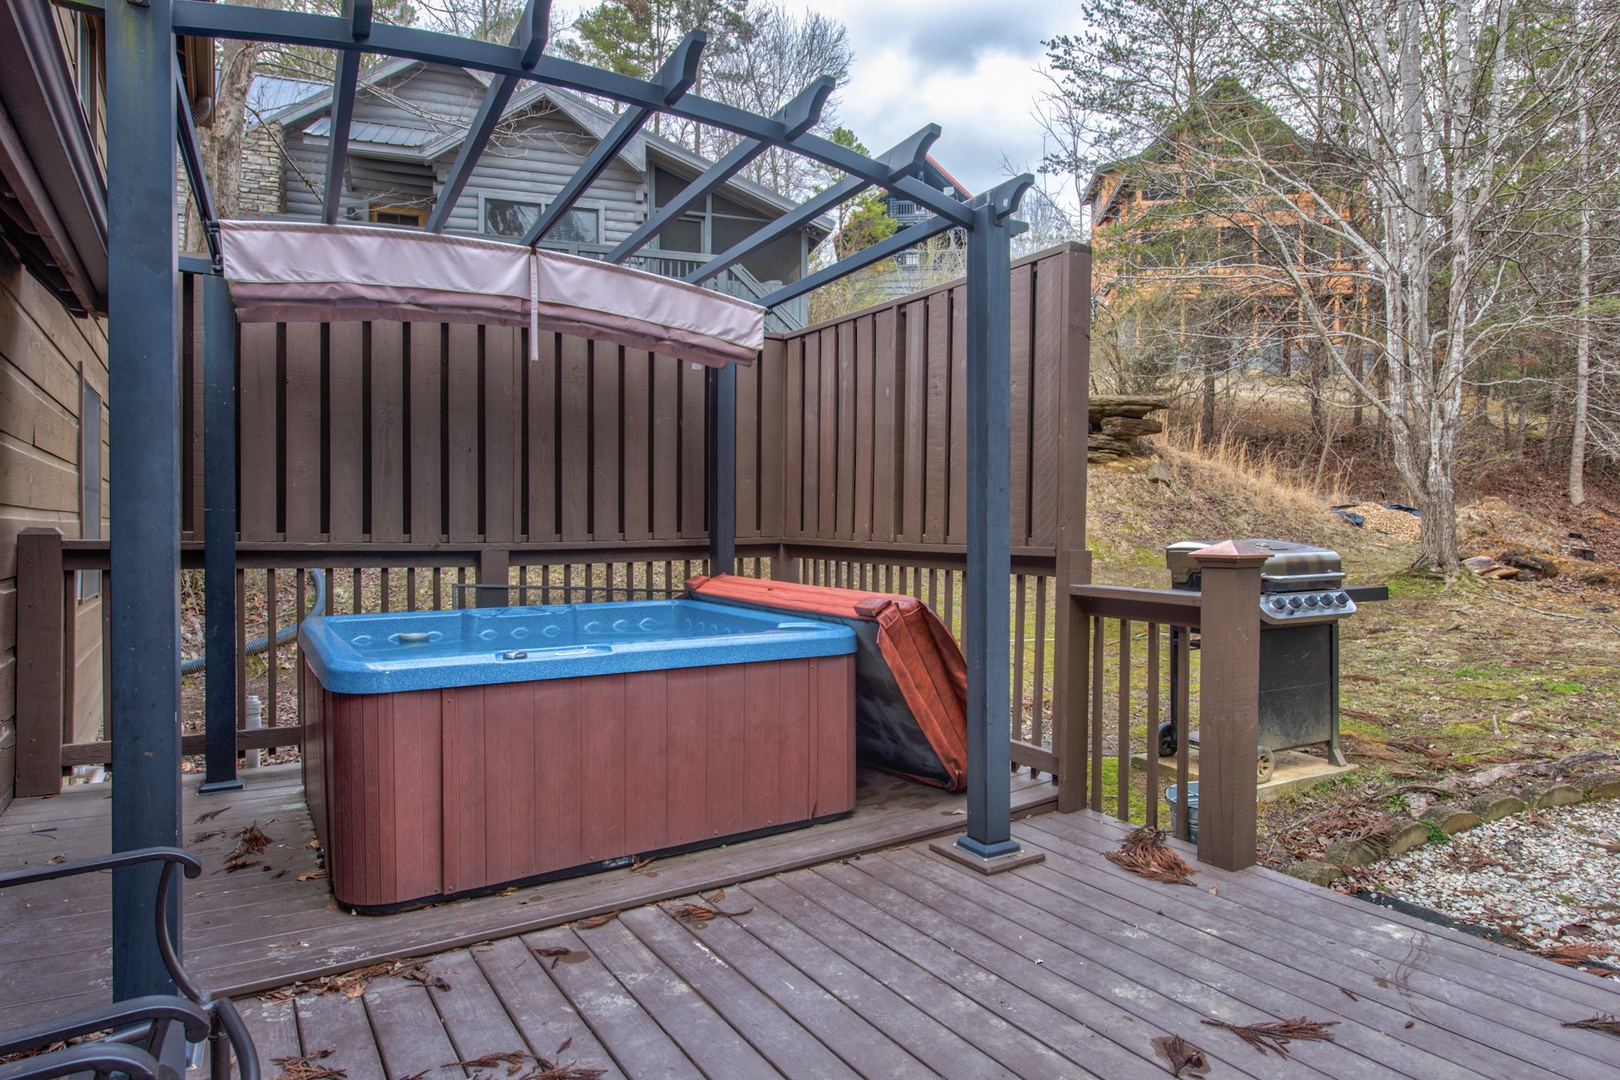 Soak your cares away in the private hot tub